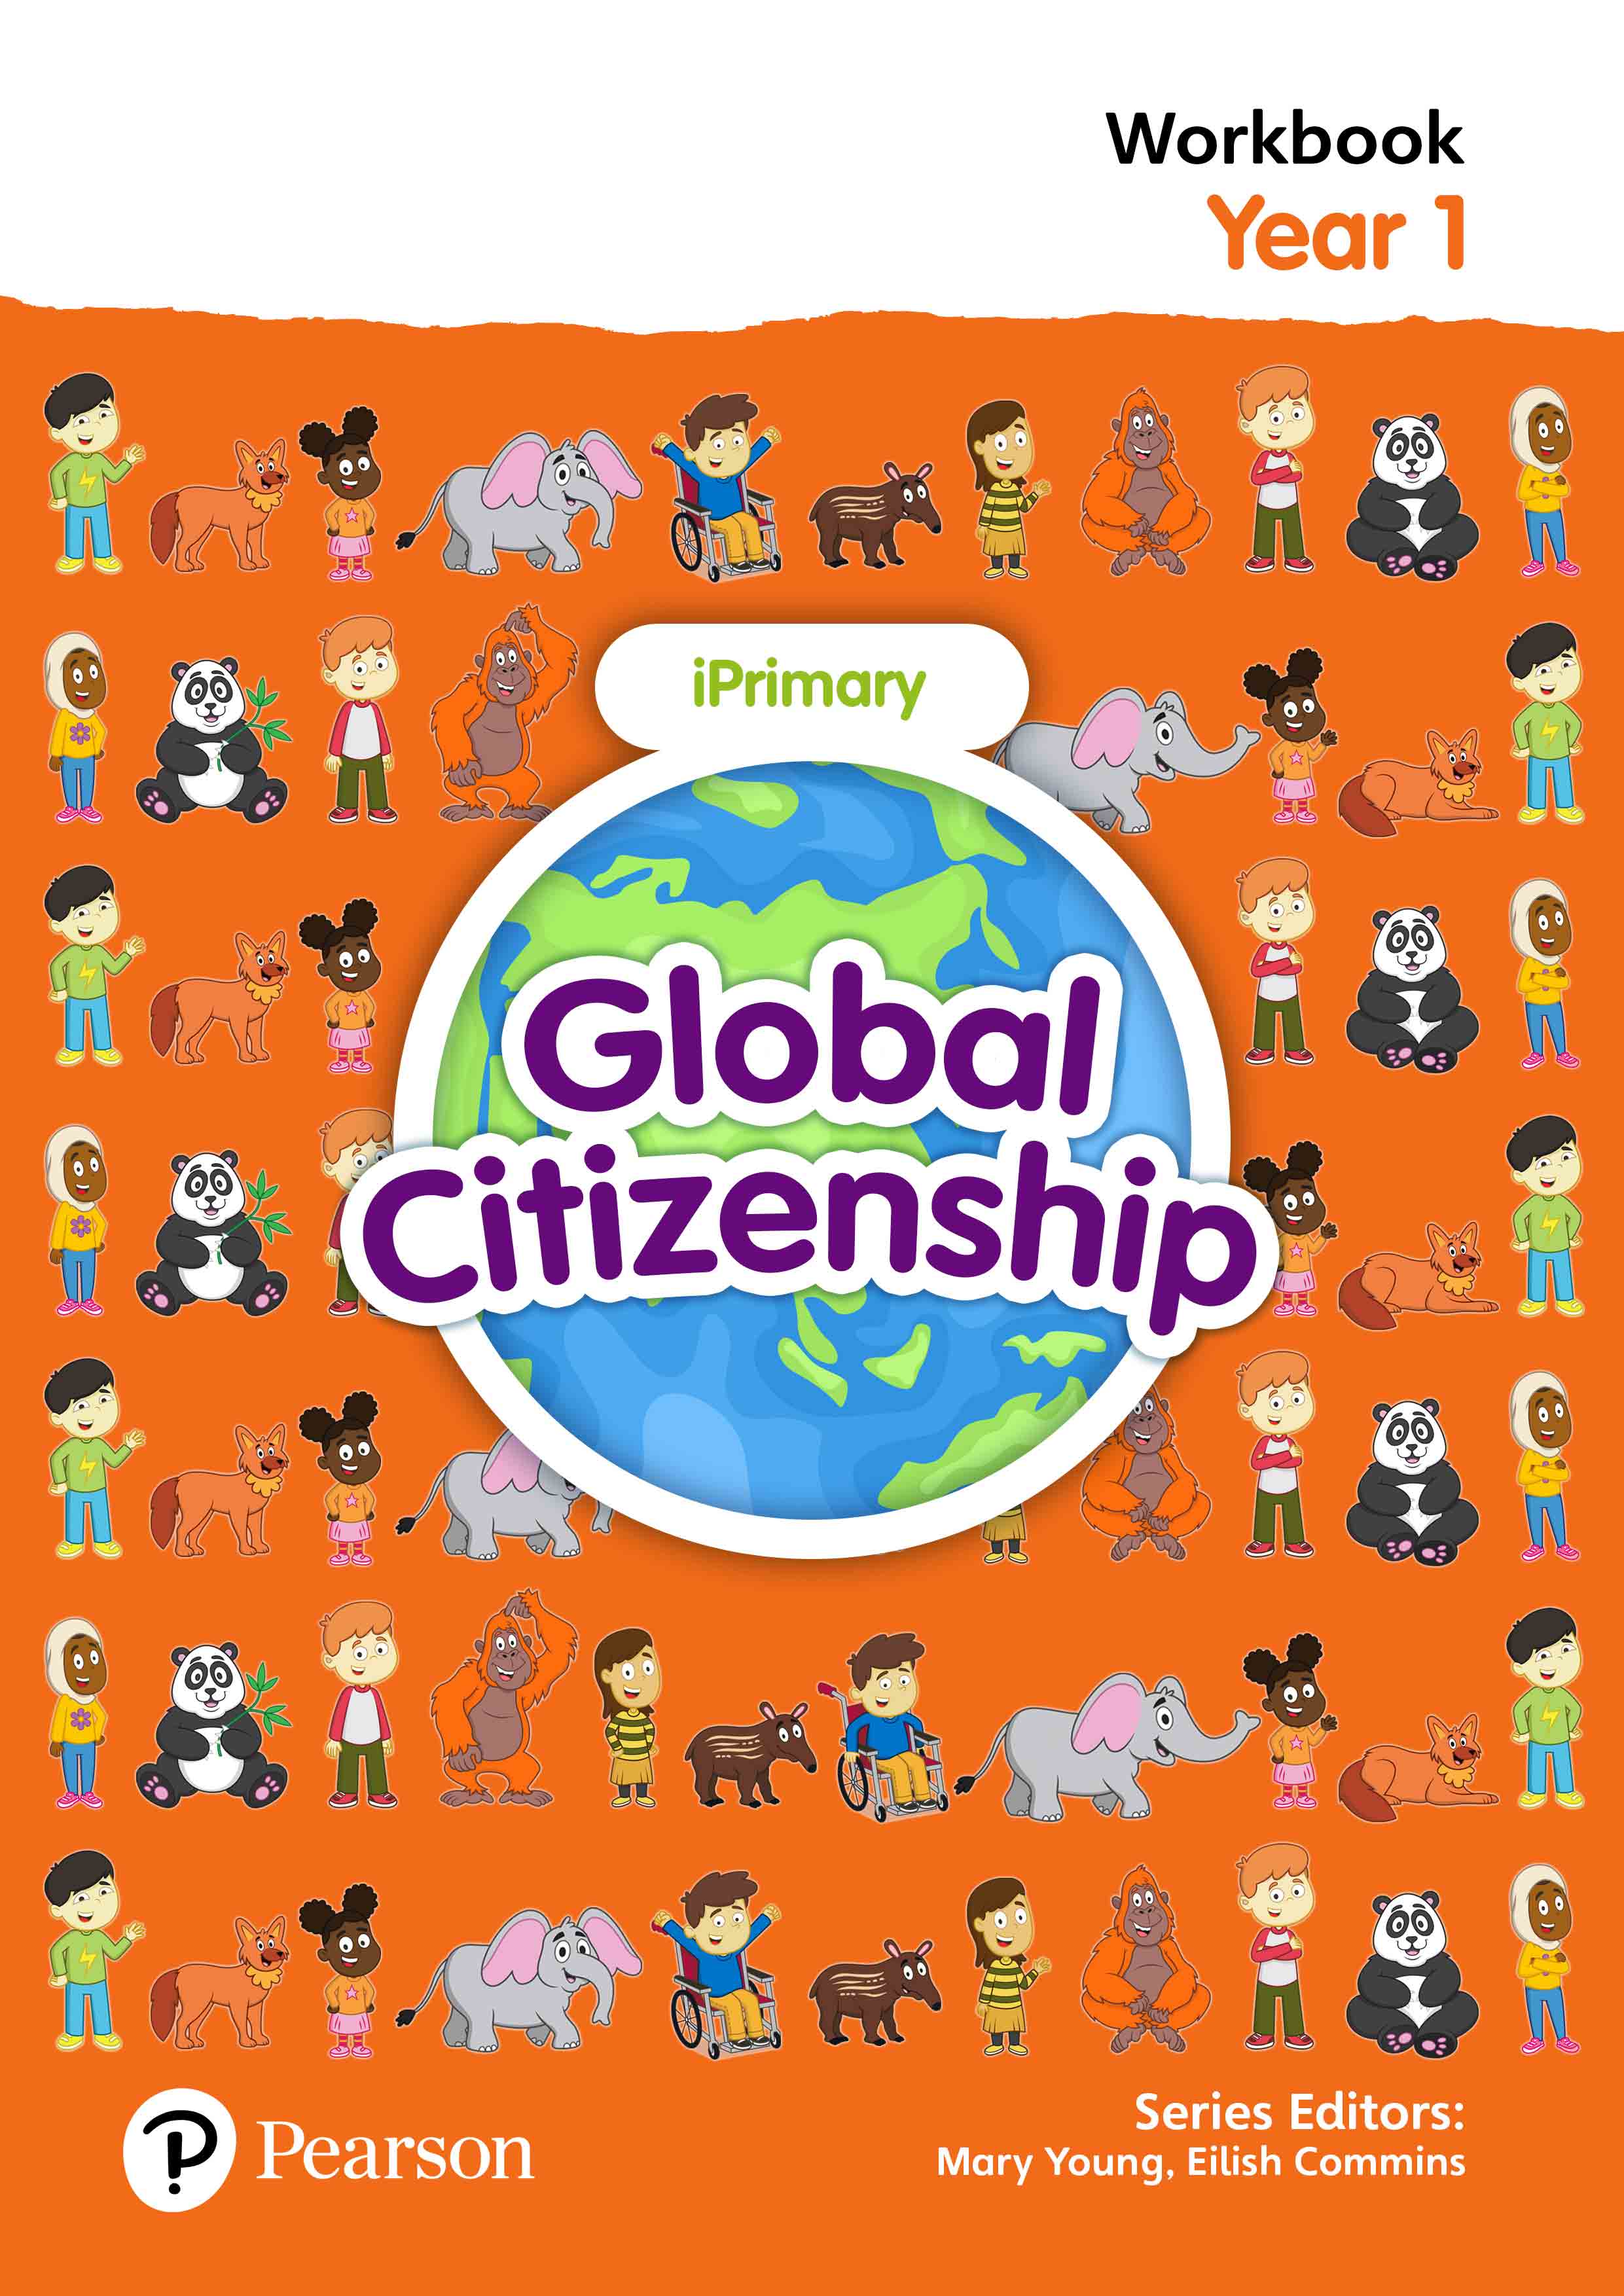 iPrimary Global Citizenship Workbook Year 1 - N/A - 9781292396743